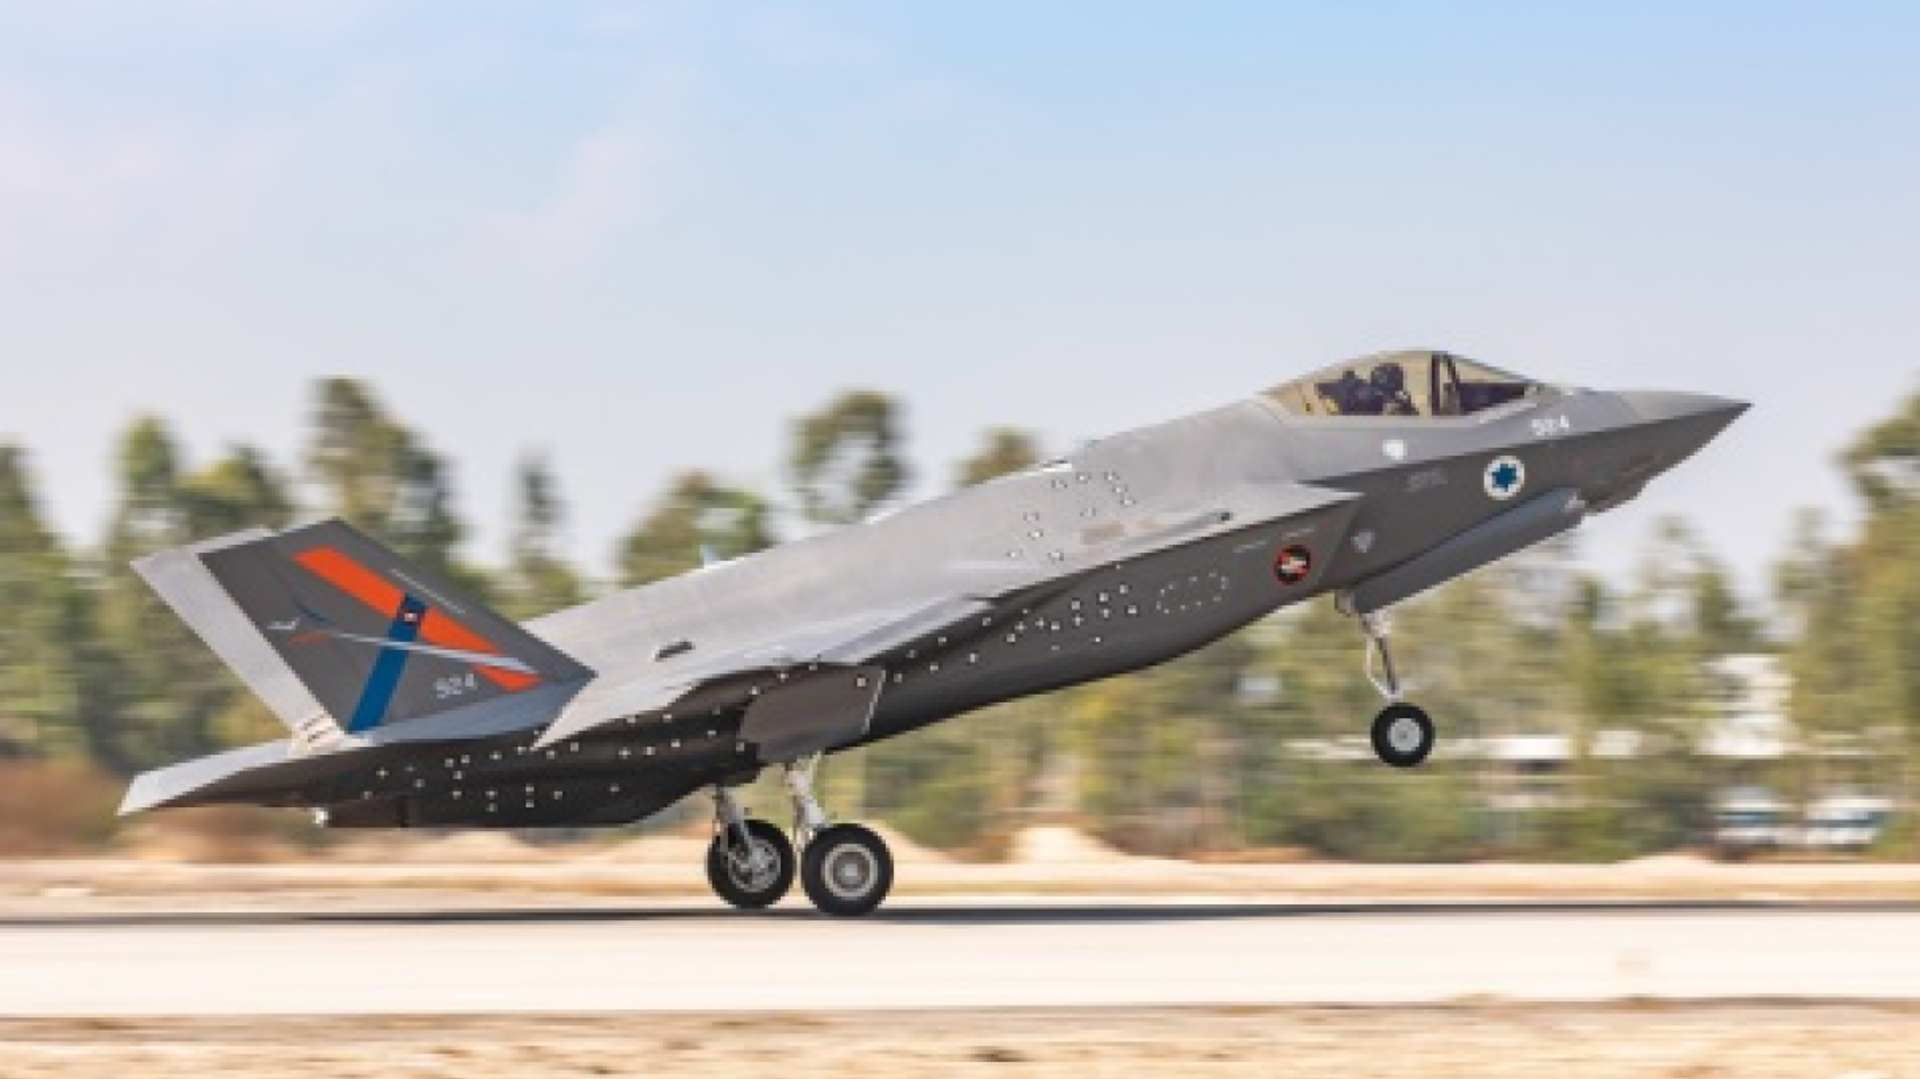 The first F-35I Adir test aircraft outside of the US landed at the Israeli AF Flight Test Center at Tel-Nof AFB on Nov. 11, 2020. It will be used to develop and test advanced capabilities that Israel alone is allowed to add to its fleet of F-35I fighters. - Sputnik International, 1920, 09.02.2022